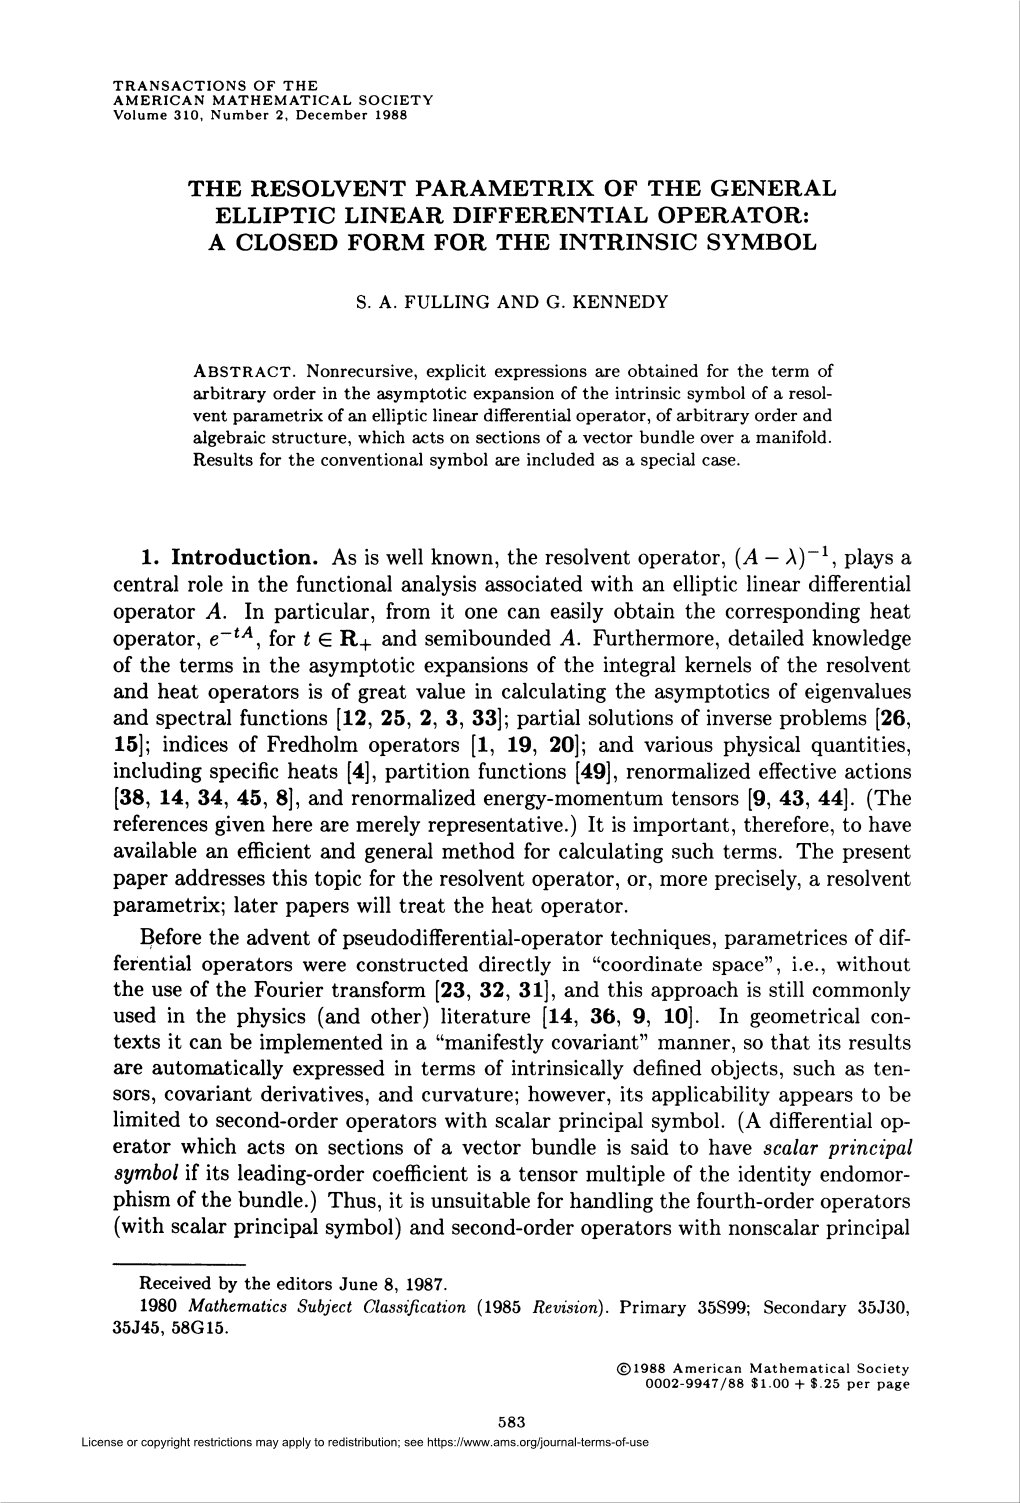 The Resolvent Parametrix of the General Elliptic Linear Differential Operator: a Closed Form for the Intrinsic Symbol